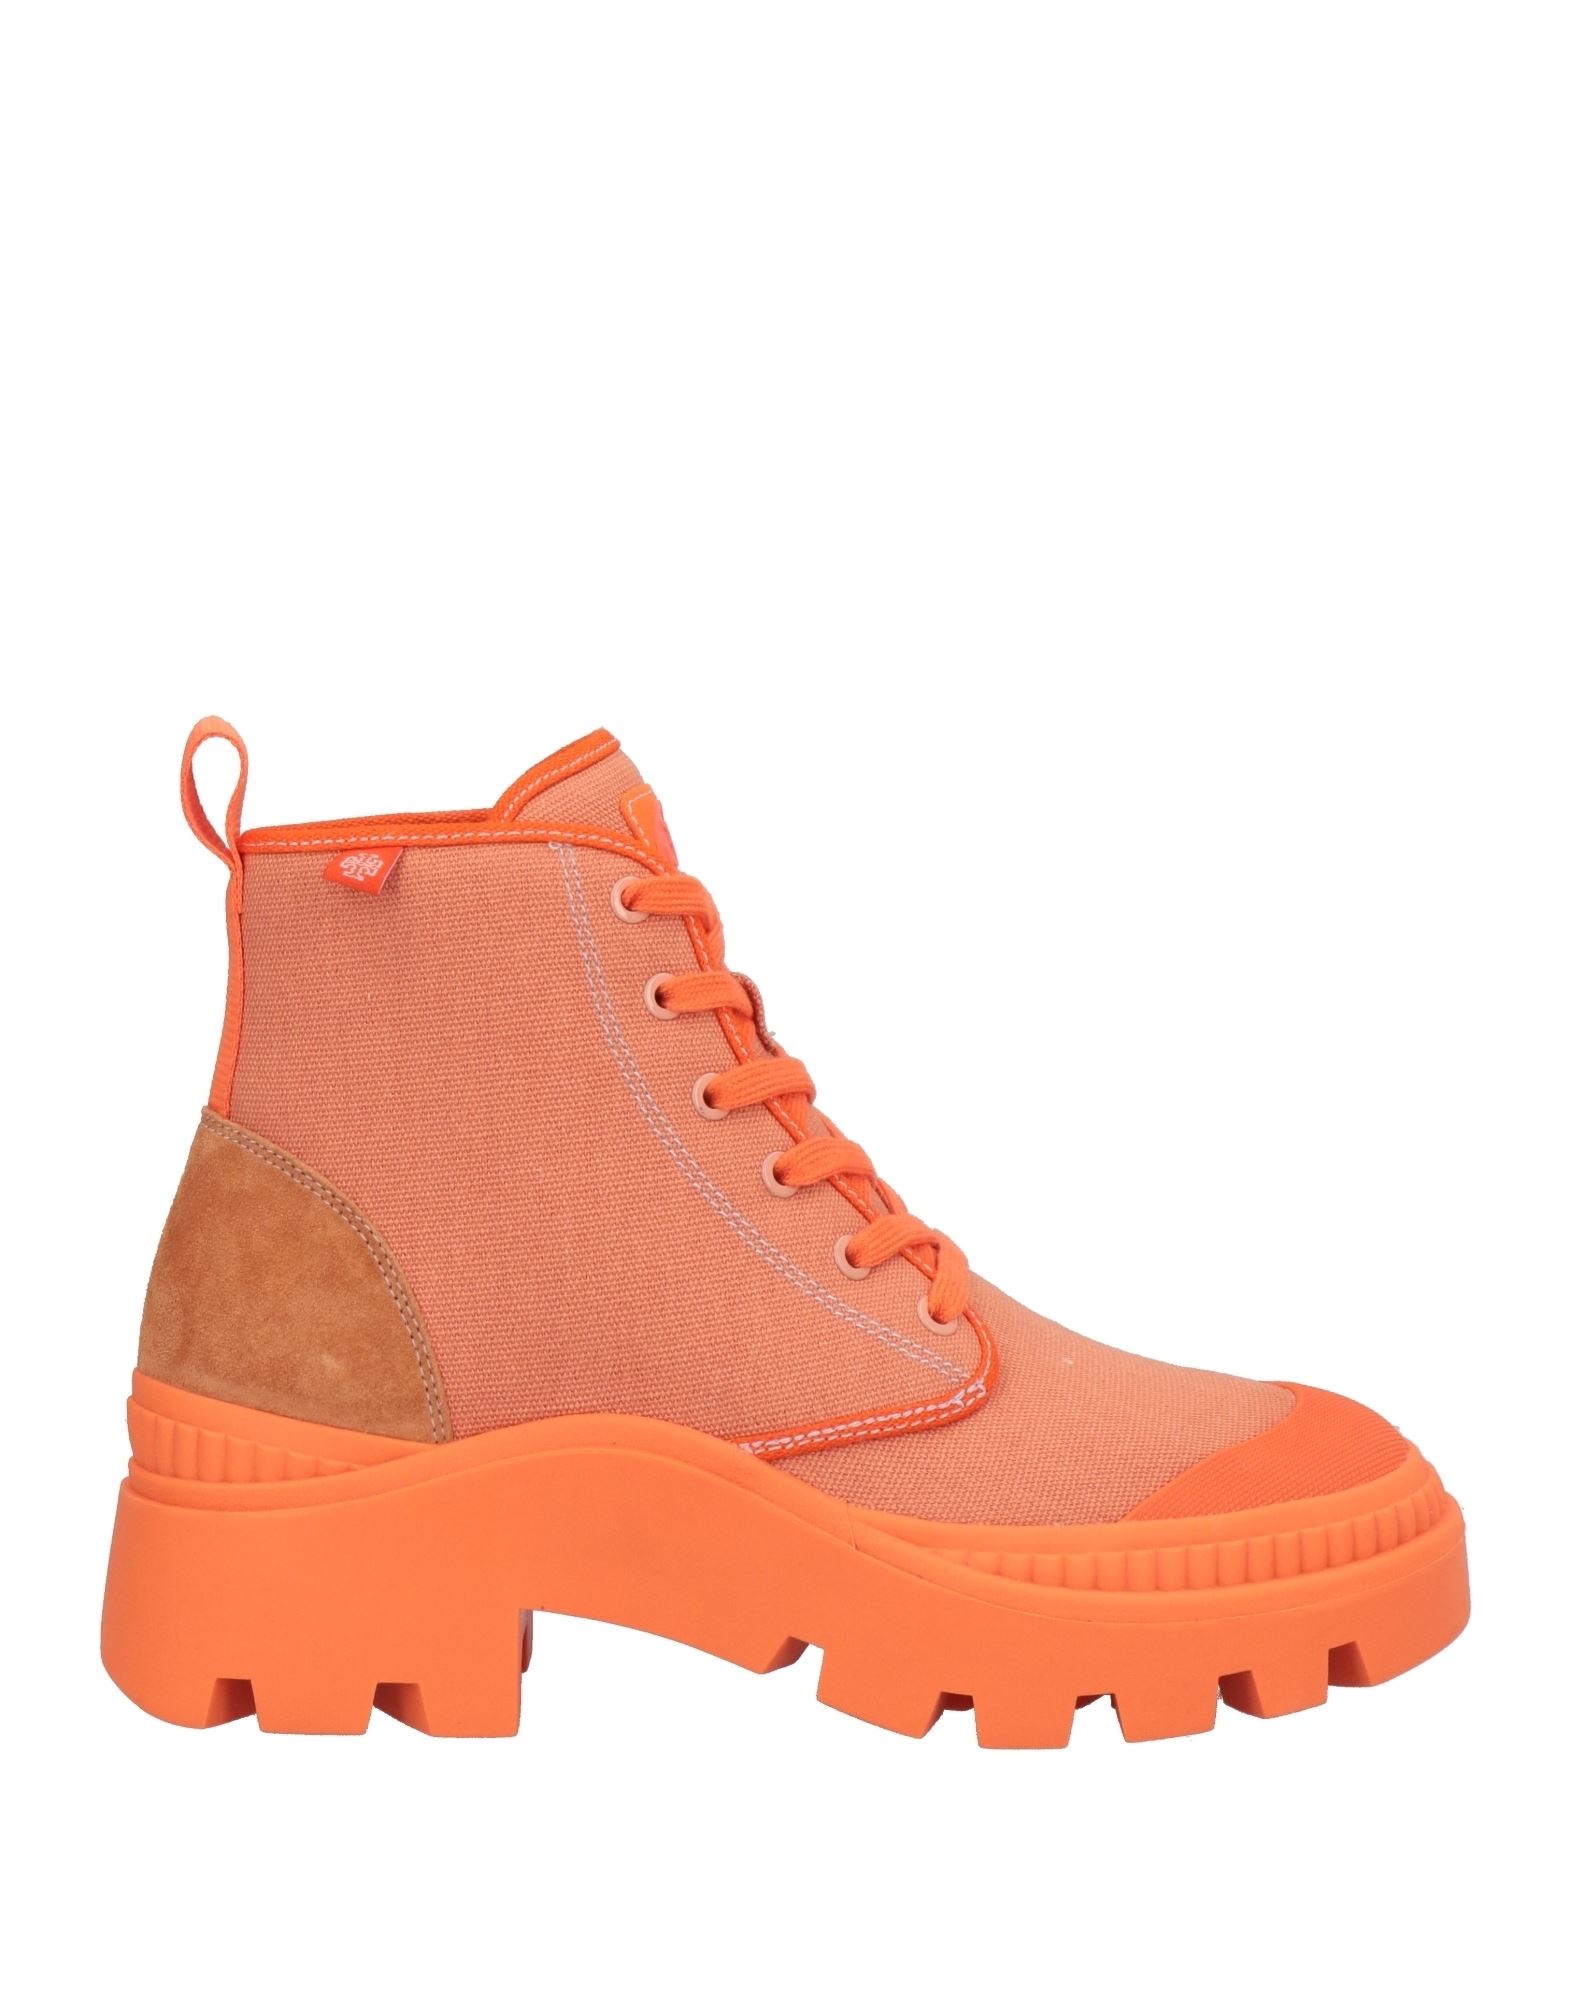 Tory Burch Ankle Boots In Orange